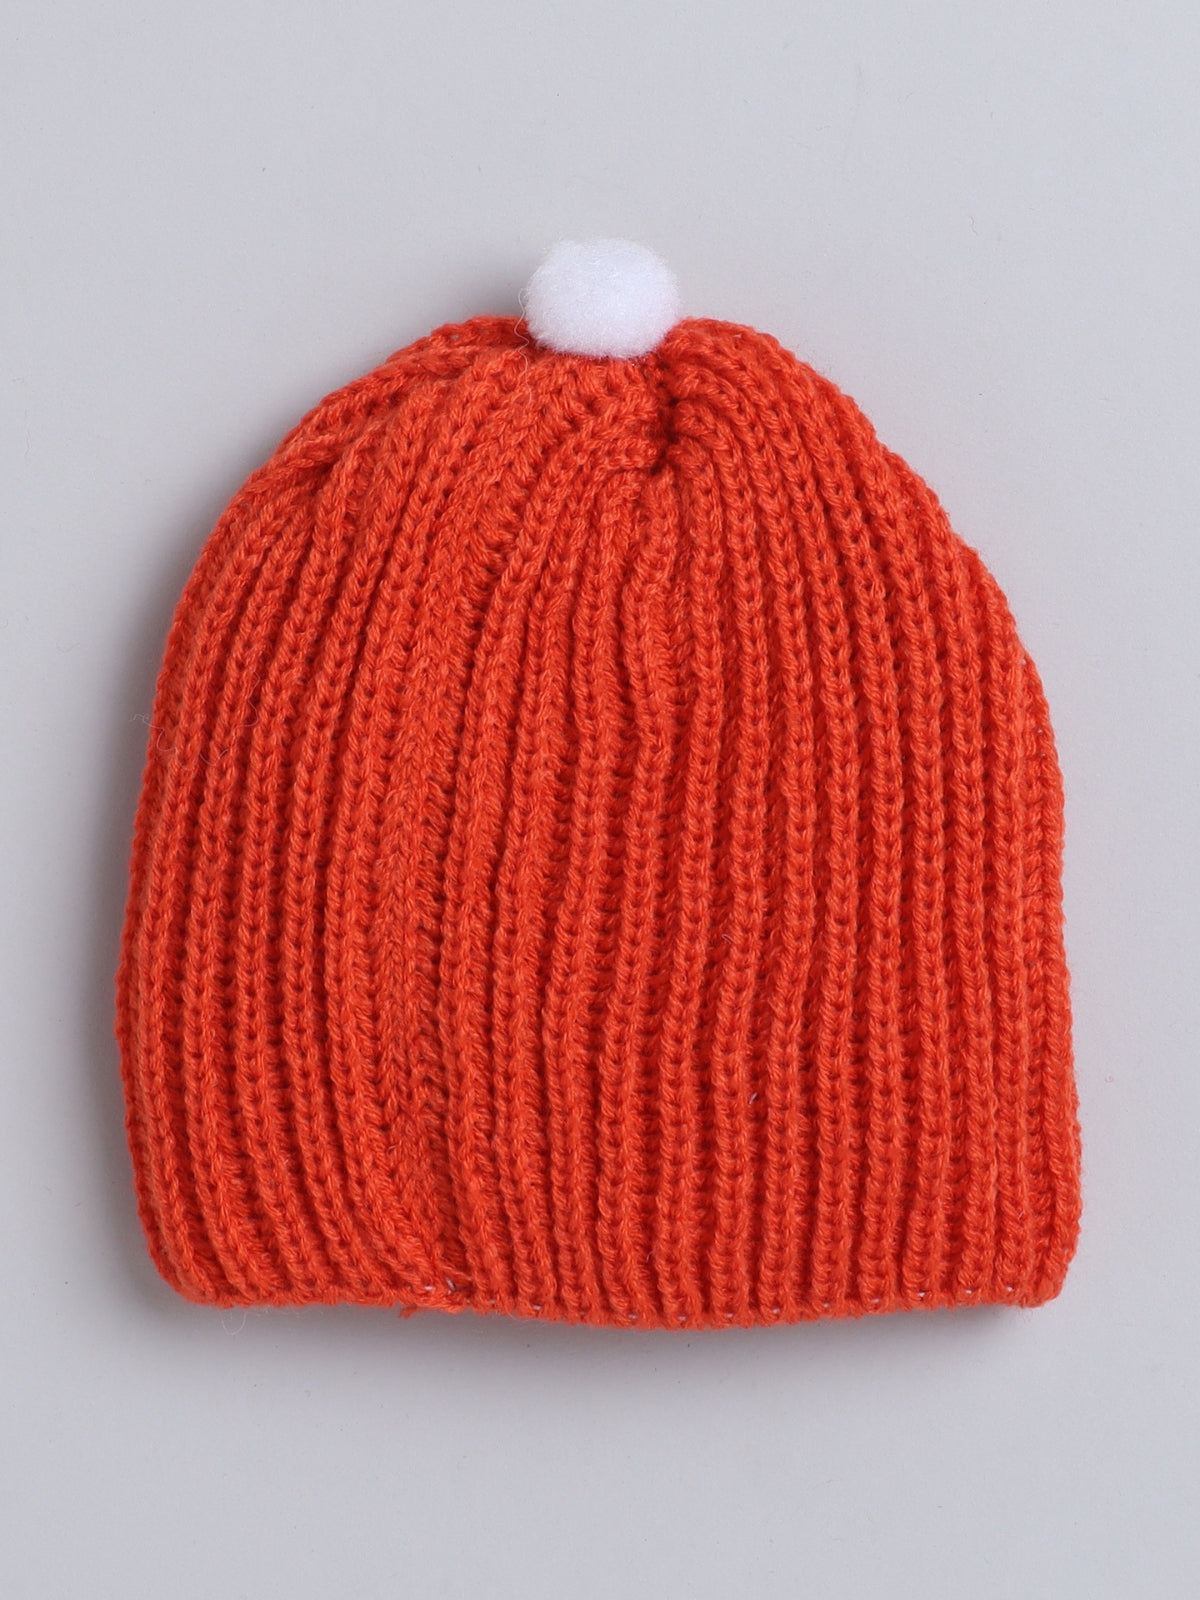 Knited Orange color round cap for baby